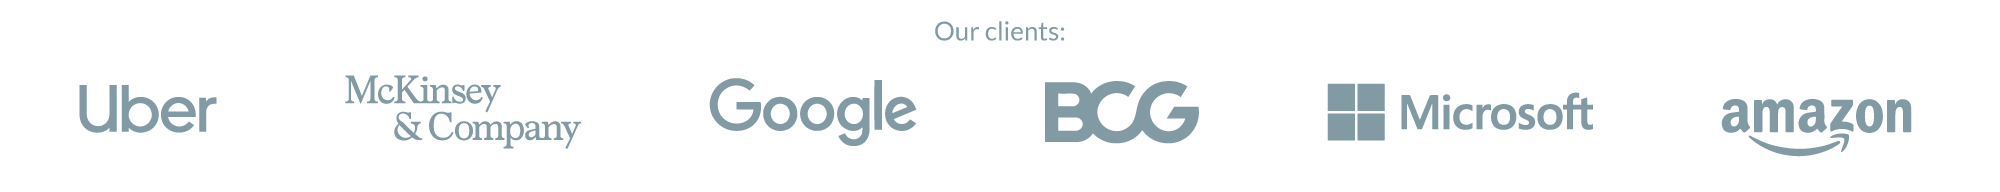 Our clients: Uber, McKinsey, Google, BCG, Microsoft, and Amazon 